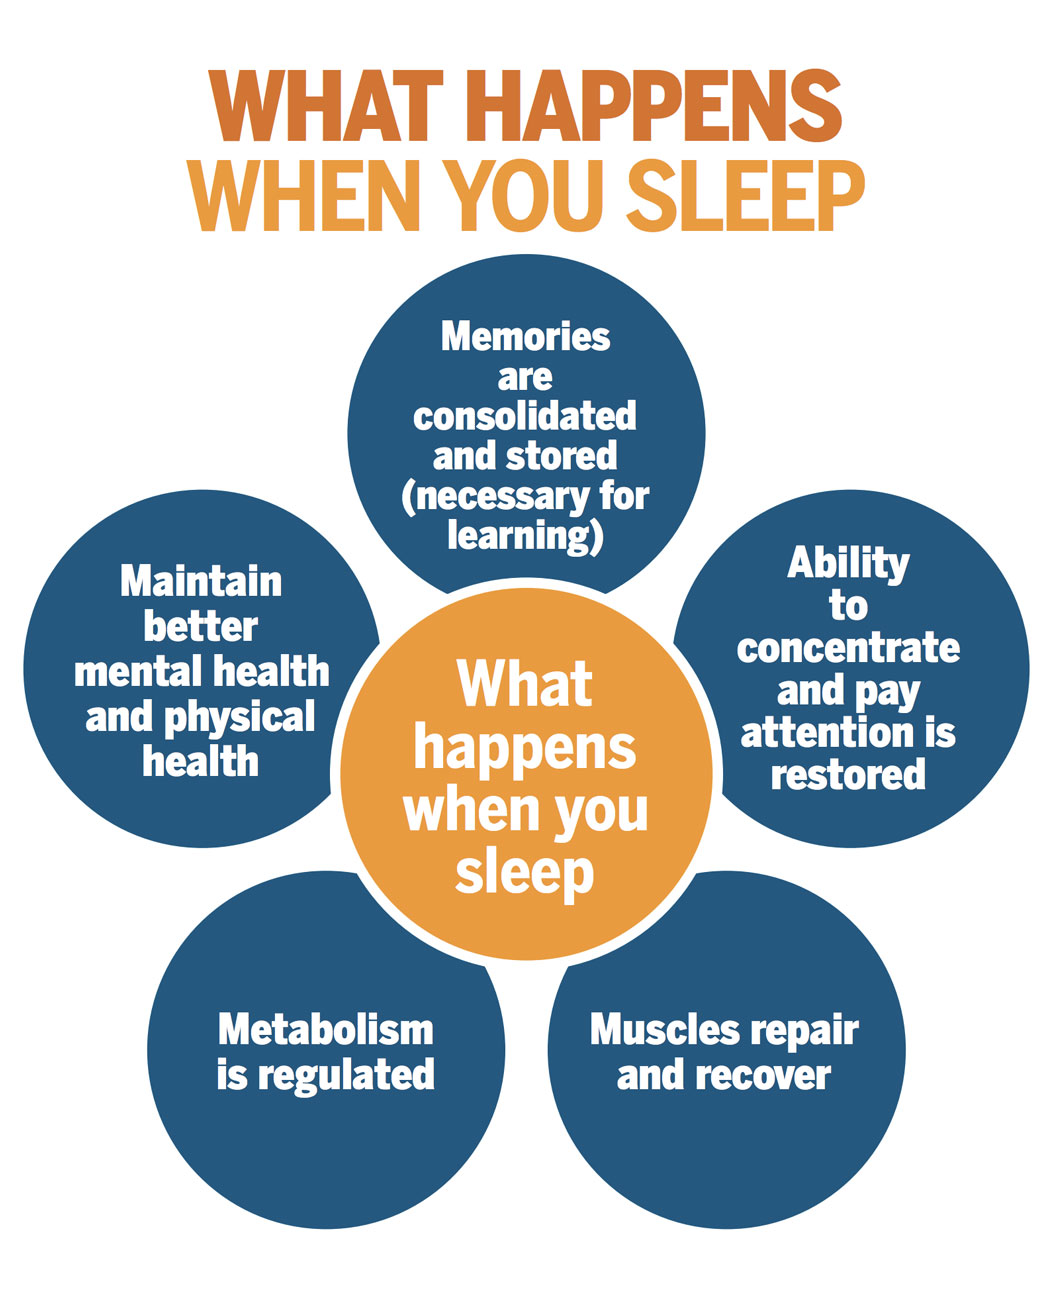 What happens when you sleep.
Memories are consolidated and stored (necessary for learning).
Ability to concentrate and pay attention is restored.
Muscles repair and recover.
Metabolism is regulated.
Maintain better mental health and physical health.
